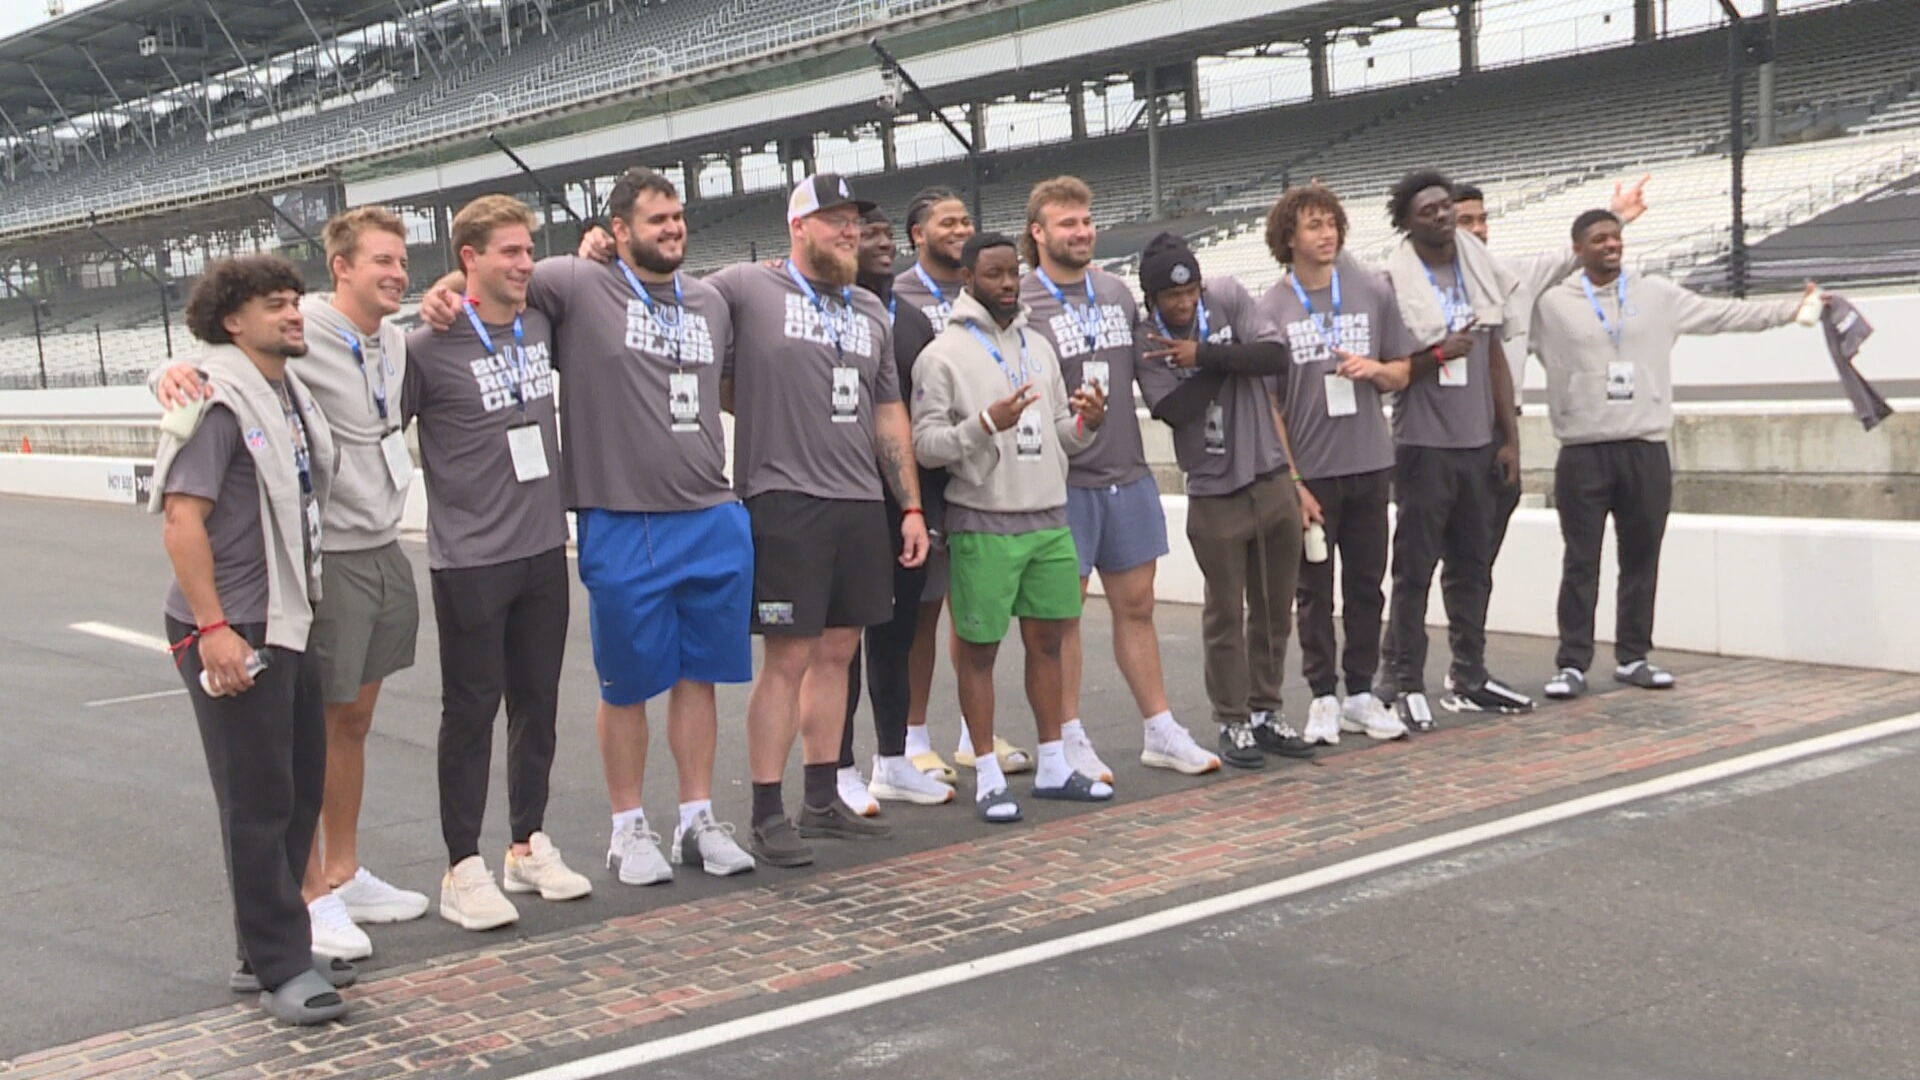 “I’m loving it”: Colts rookies visit IMS for Fast Friday